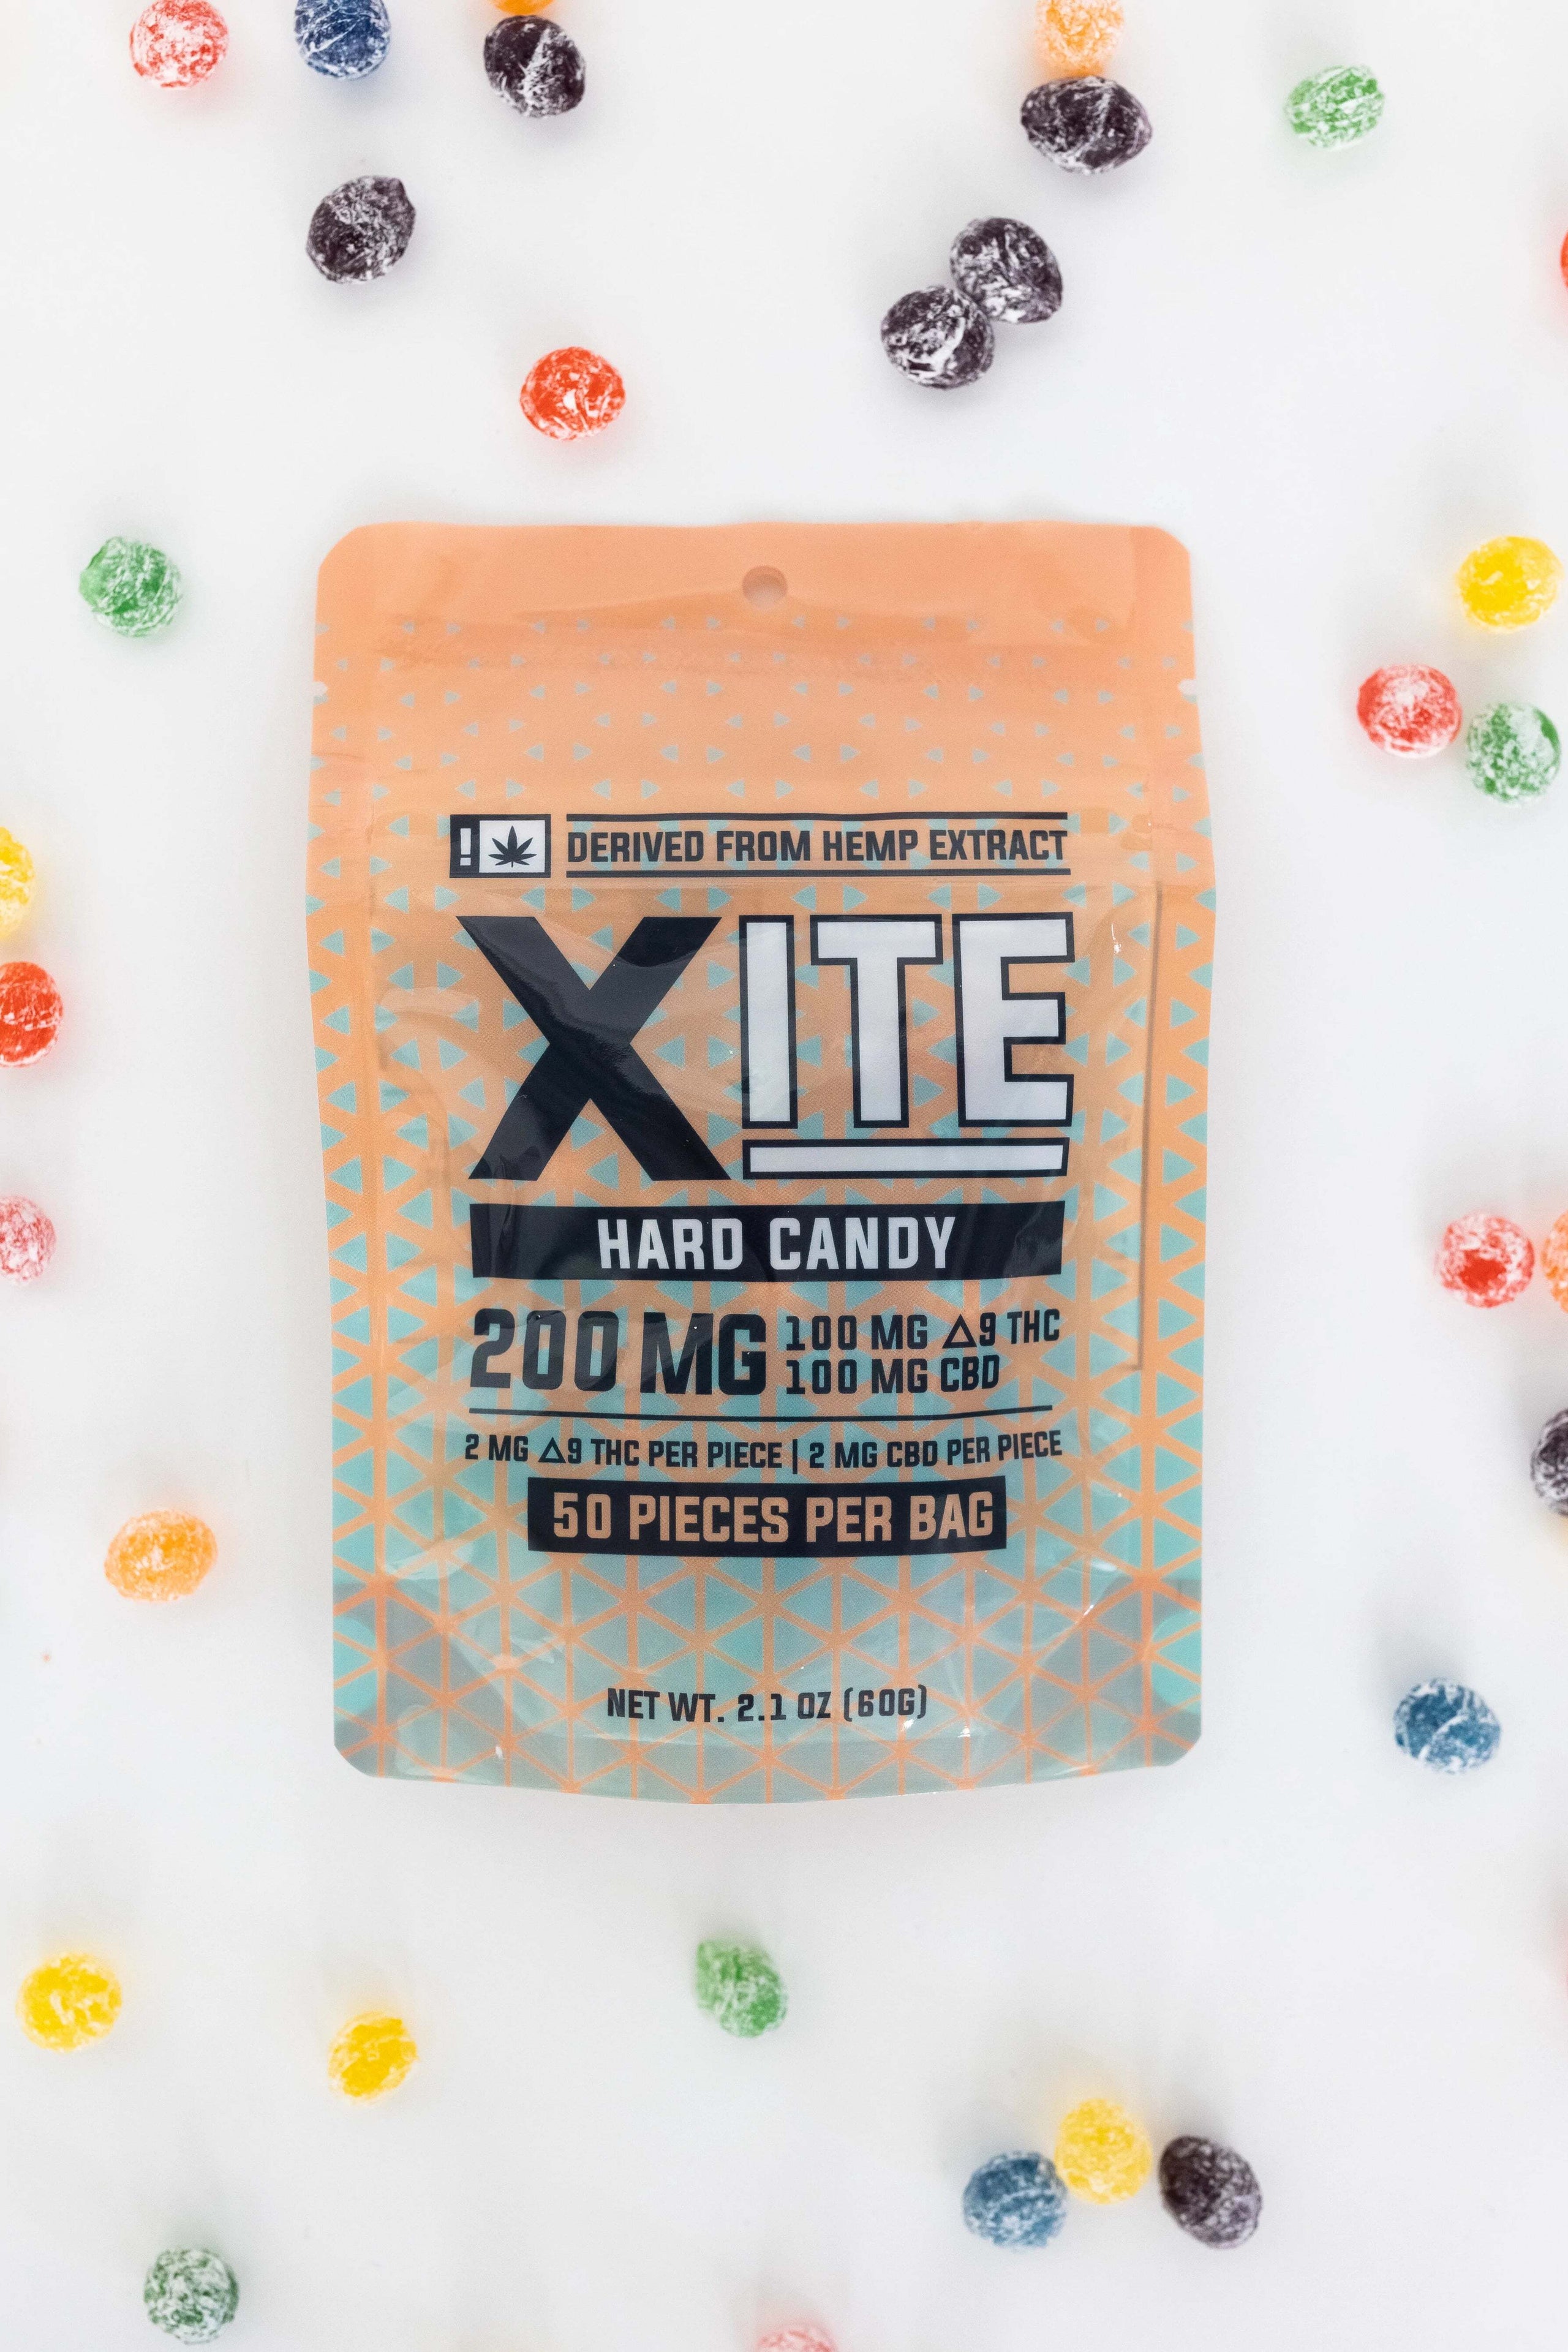 Xite, Delta 9 THC Hard Candy (200mg)